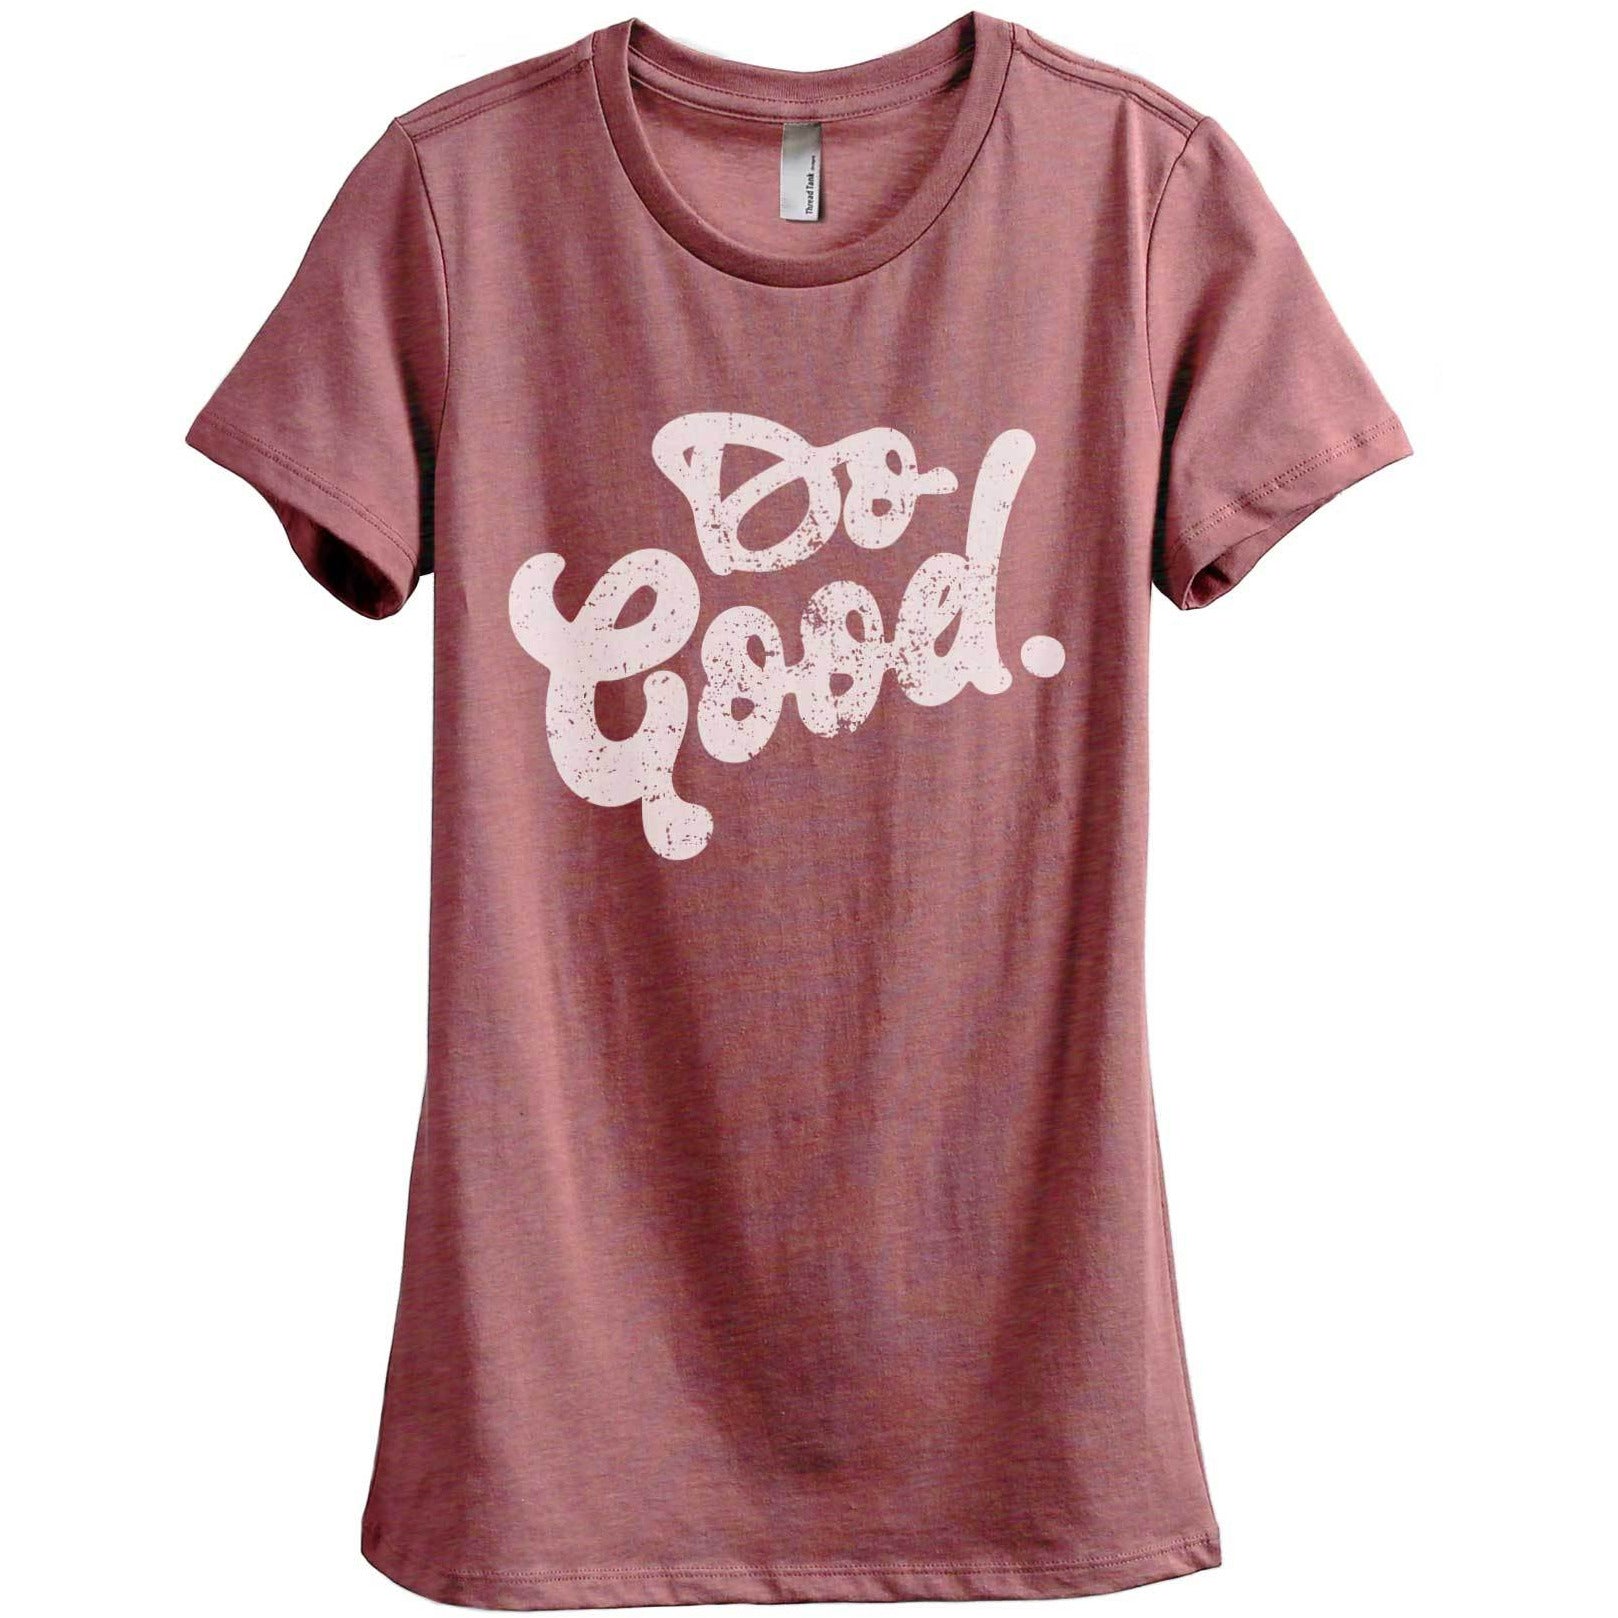 Do Good - Thread Tank | Stories You Can Wear | T-Shirts, Tank Tops and Sweatshirts